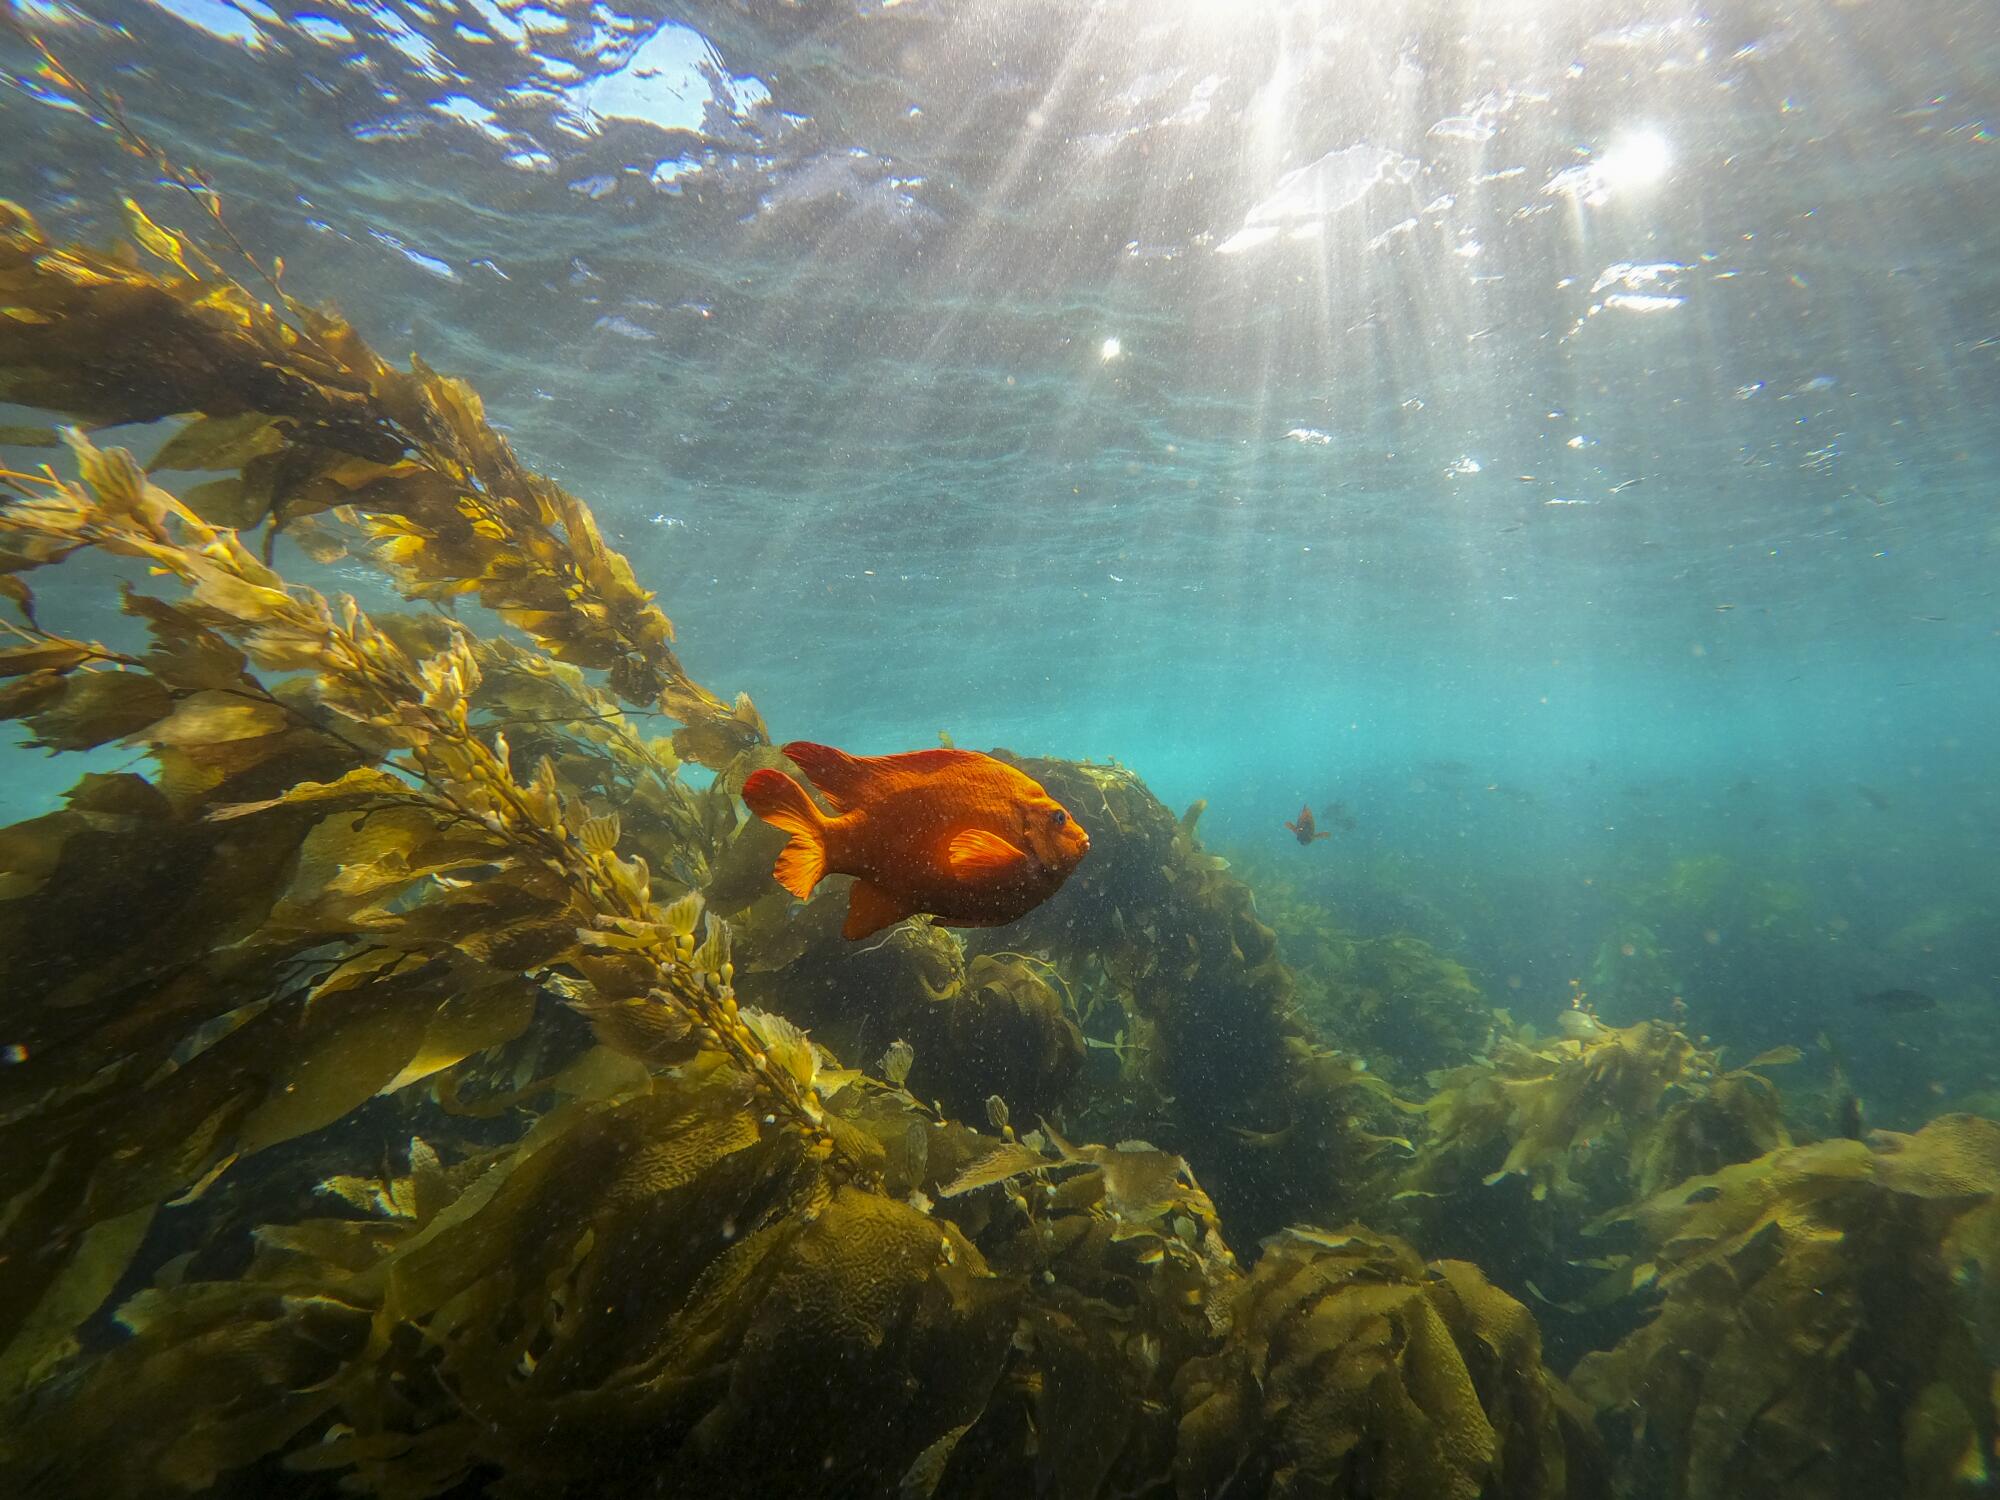 An orange fish swims in shallow water.